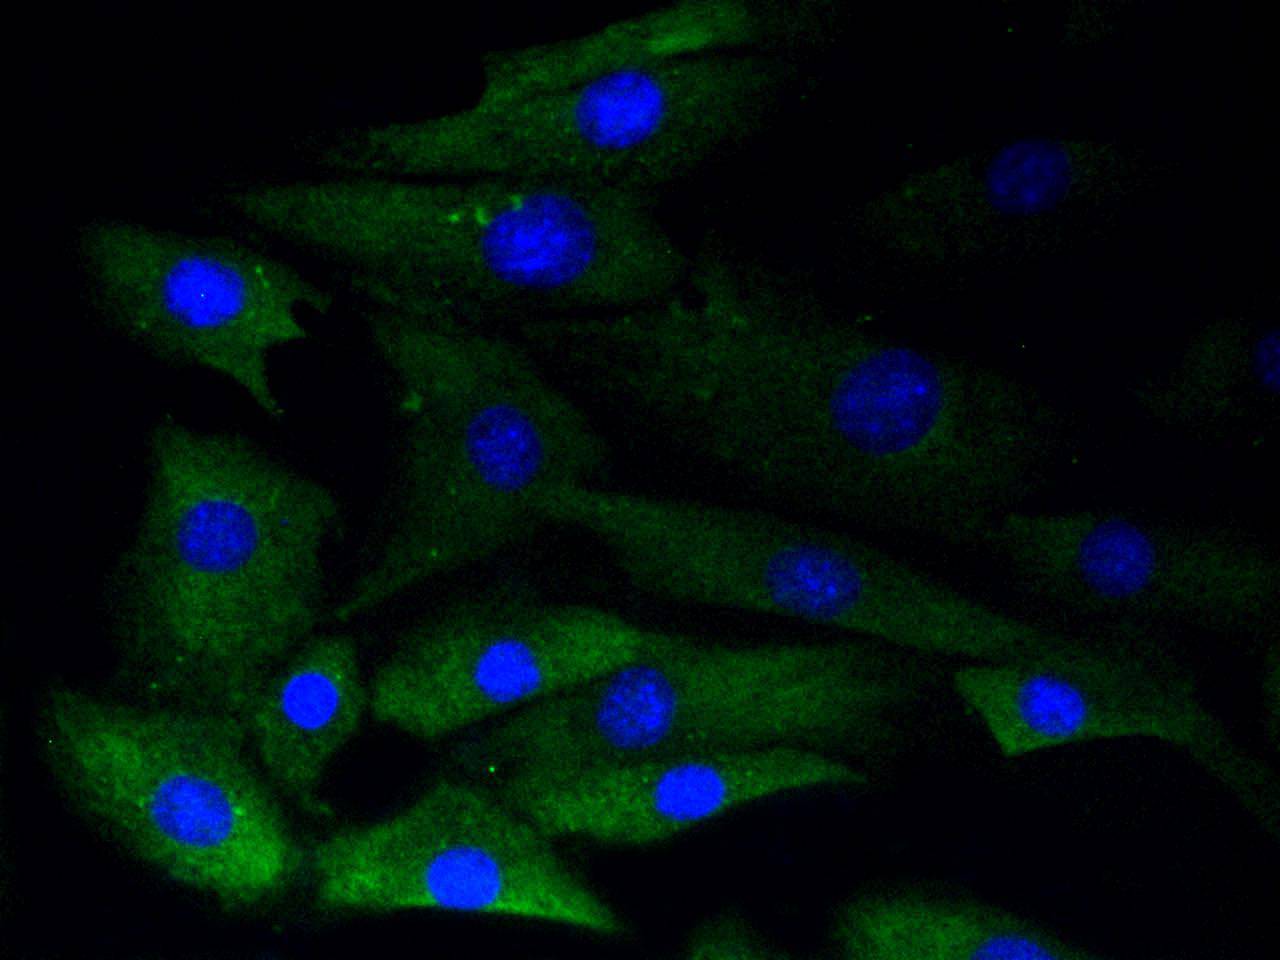 ICC staining of Phospho-Glycogen synthase 1(S641) in NIH/3T3 cells (green). Formalin fixed cells were permeabilized with 0.1% Triton X-100 in TBS for 10 minutes at room temperature and blocked with 1% Blocker BSA for 15 minutes at room temperature. Cells were probed with the primary antibody (ET1602-13, 1/50) for 1 hour at room temperature, washed with PBS. Alexa Fluor®488 Goat anti-Rabbit IgG was used as the secondary antibody at 1/1,000 dilution. The nuclear counter stain is DAPI (blue).